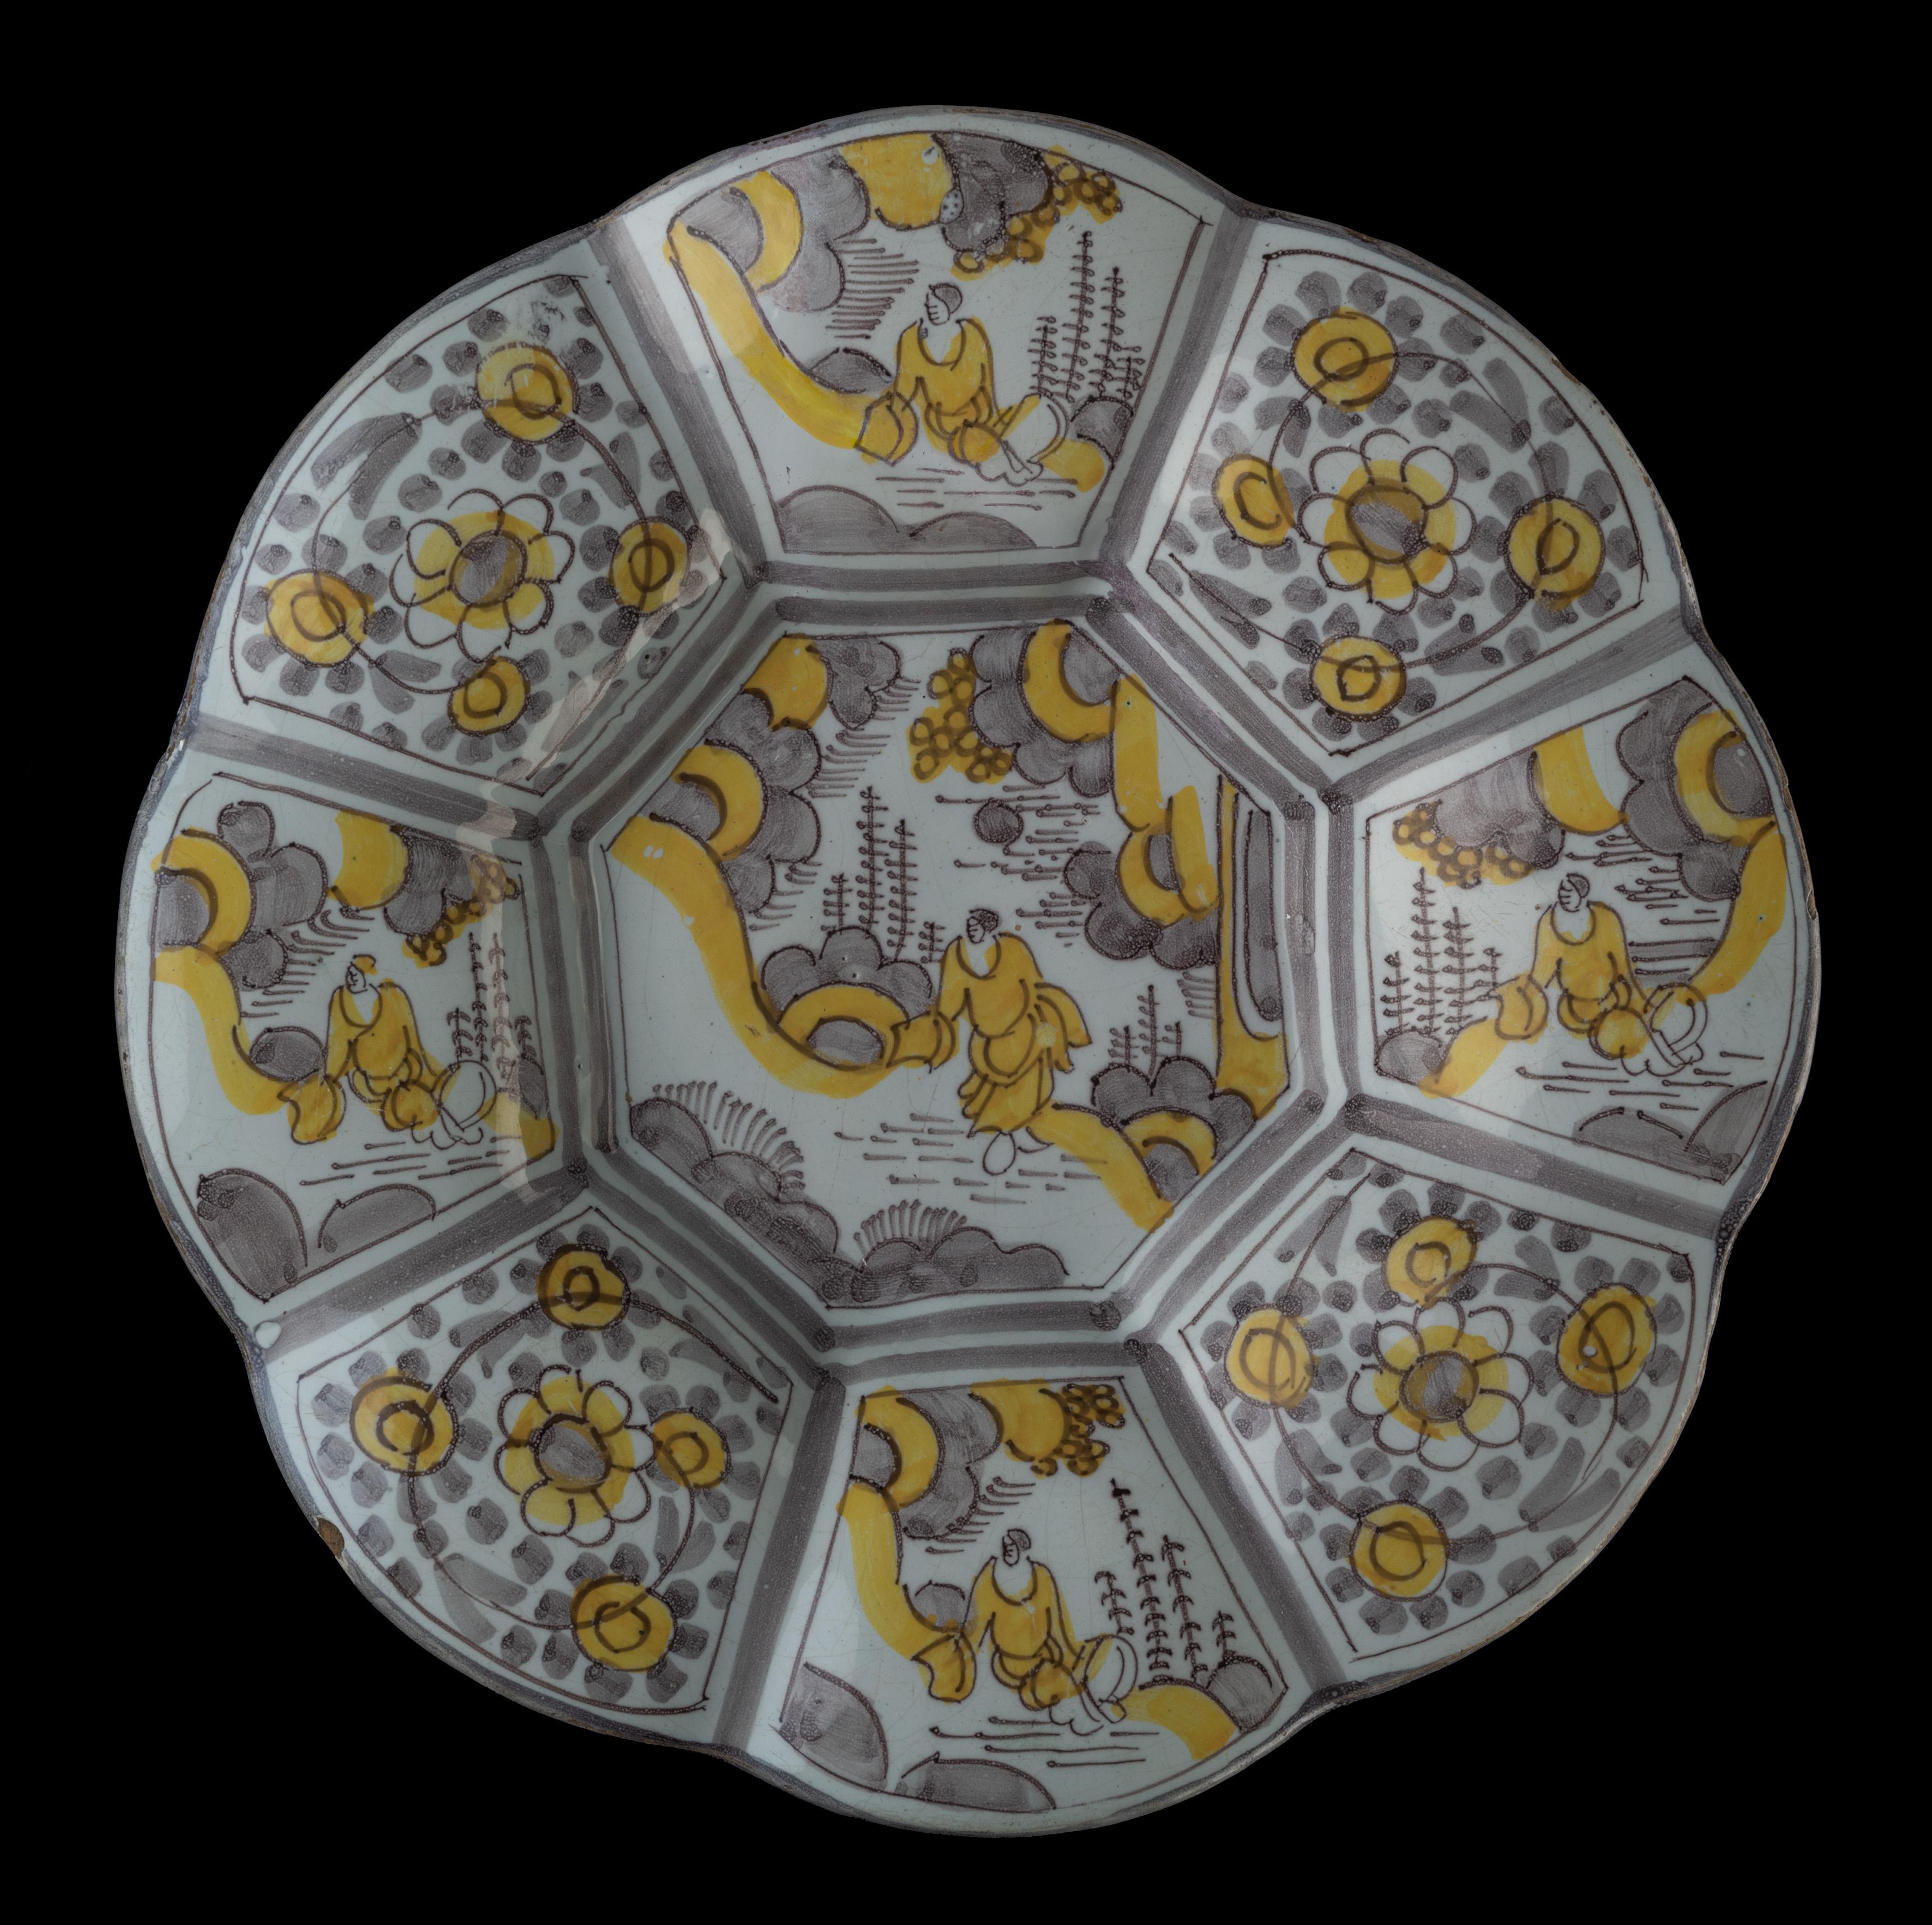 Purple and yellow chinoiserie lobed dish. Delft, 1680-1700 
Dimensions: diameter 34,5 cm / 13.58 in. 

The lobed dish is composed of eight wide lobes and is painted in purple and yellow with a chinoiserie décor. The centre is decorated with a